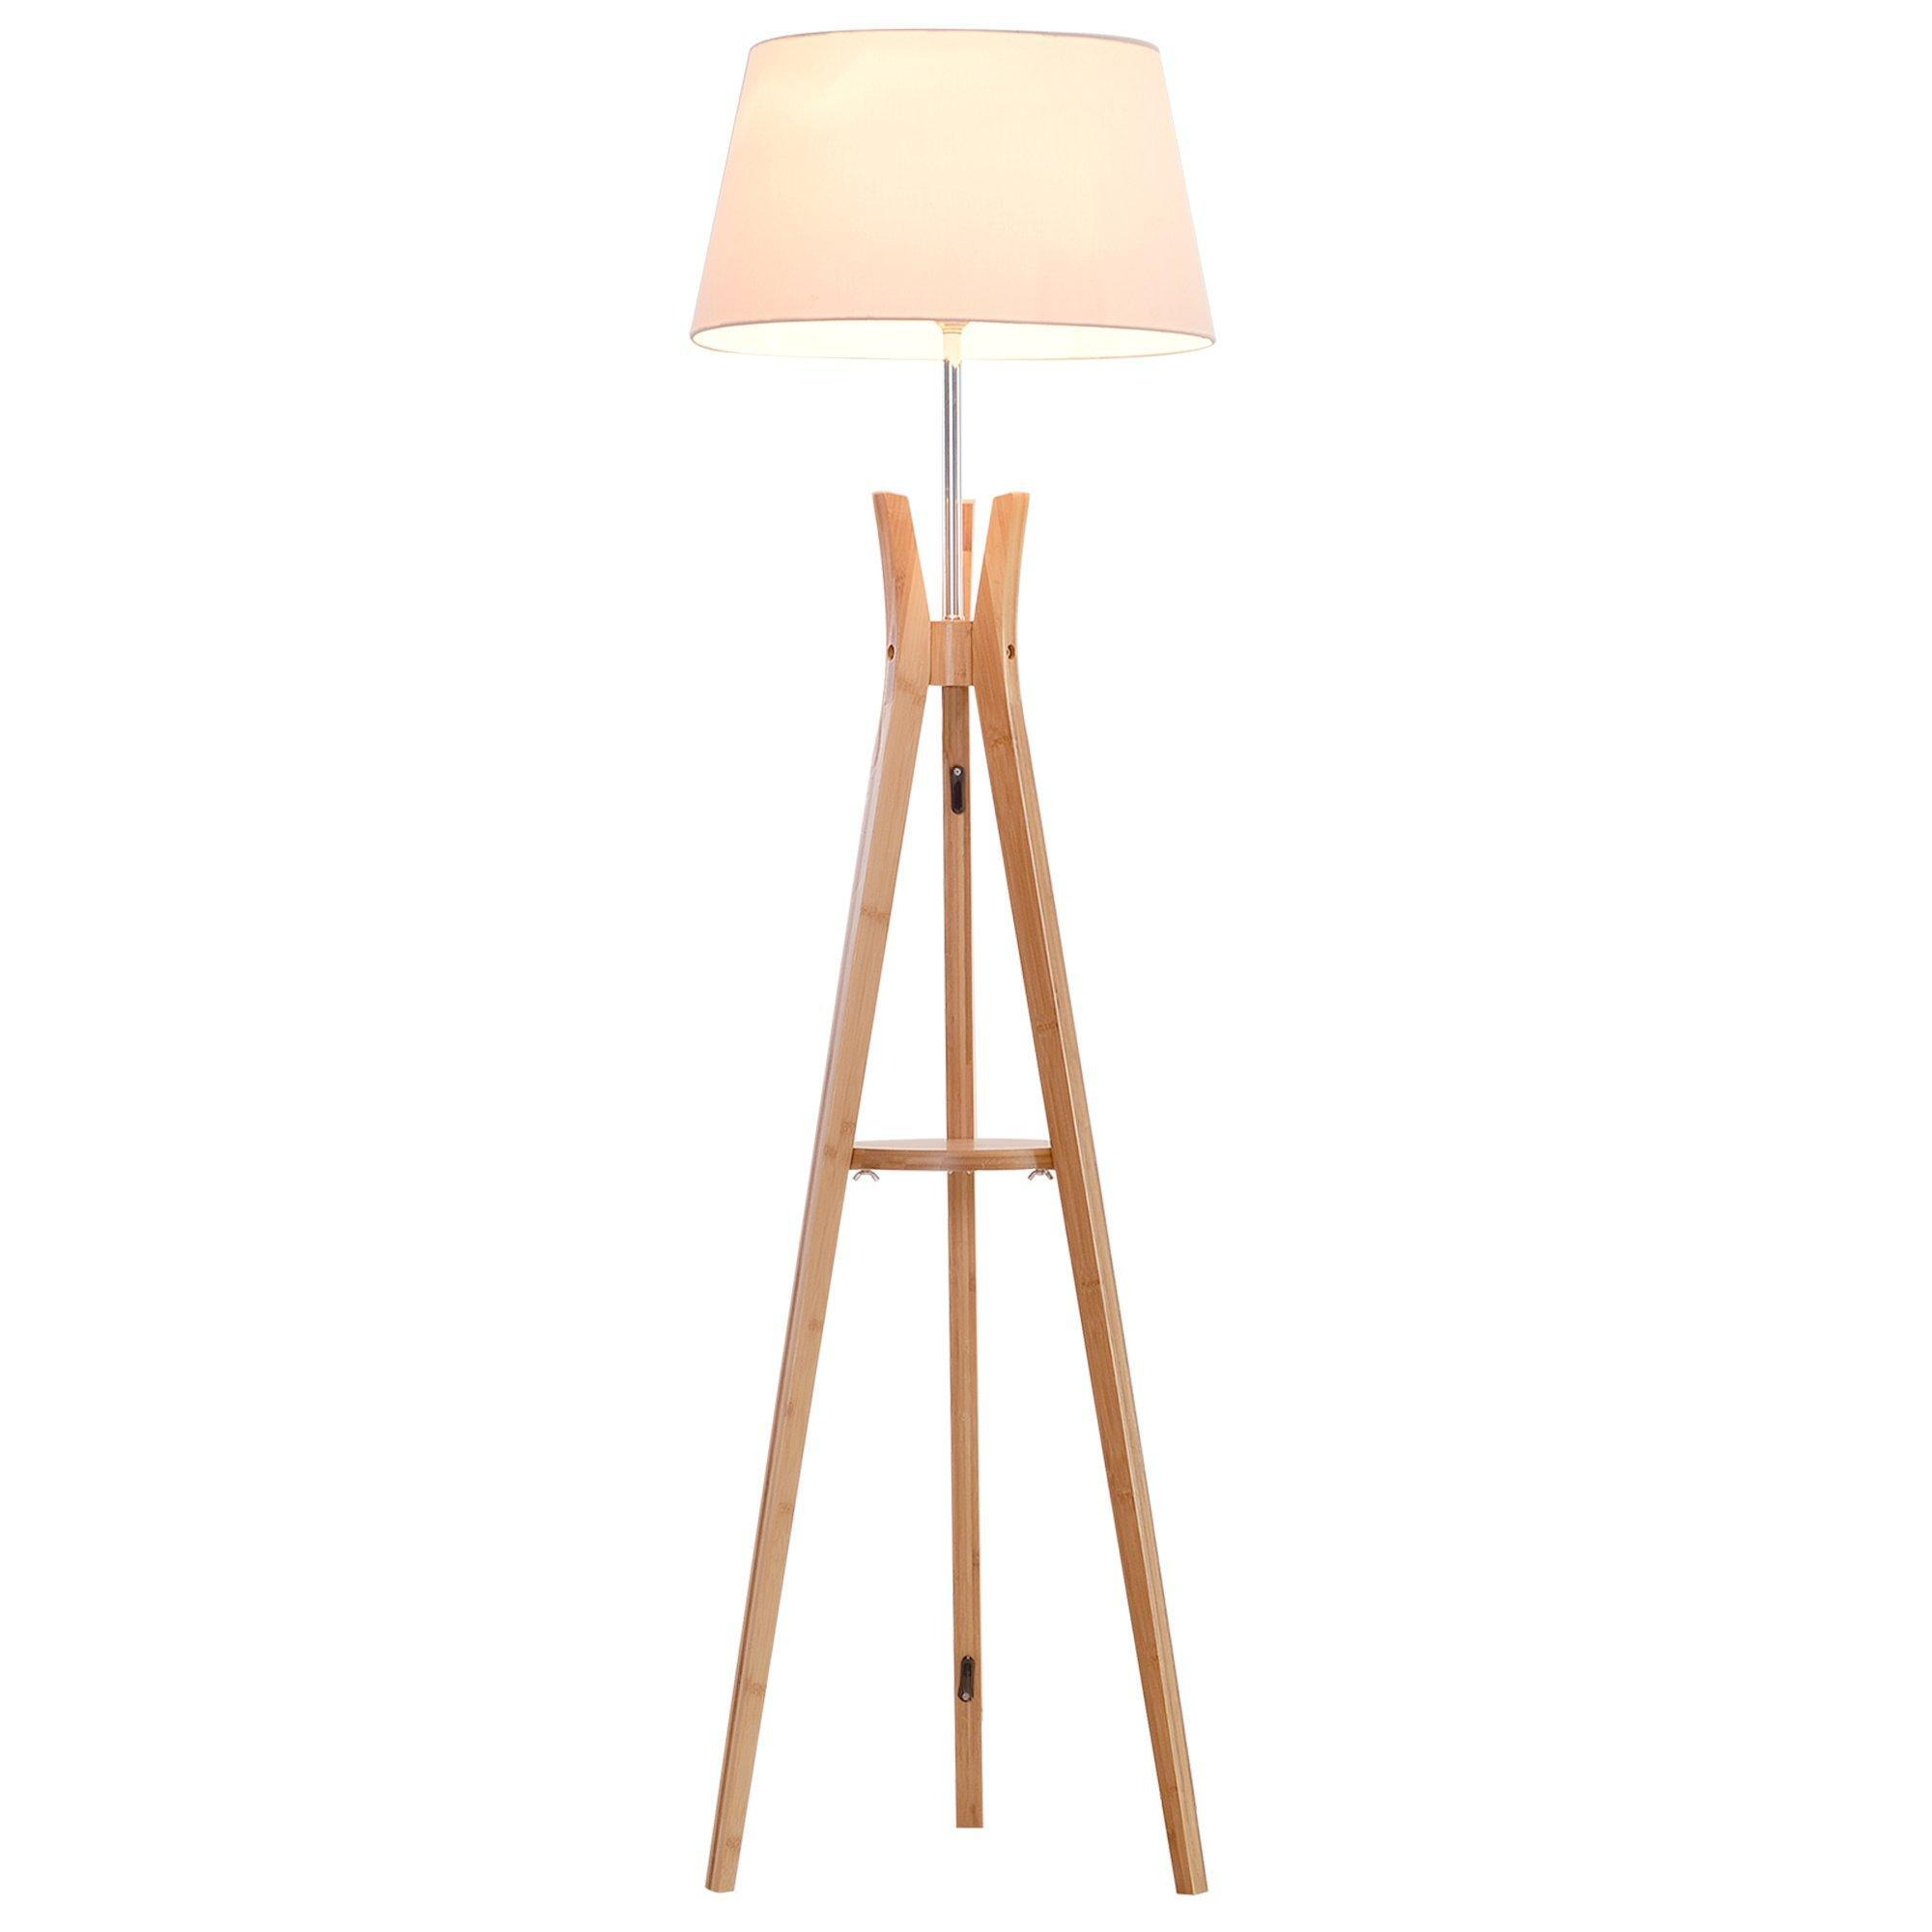 Floor Lamp 40W with Pedal Switch Middle Shelf Tripod Base Fabric Shade - image 1